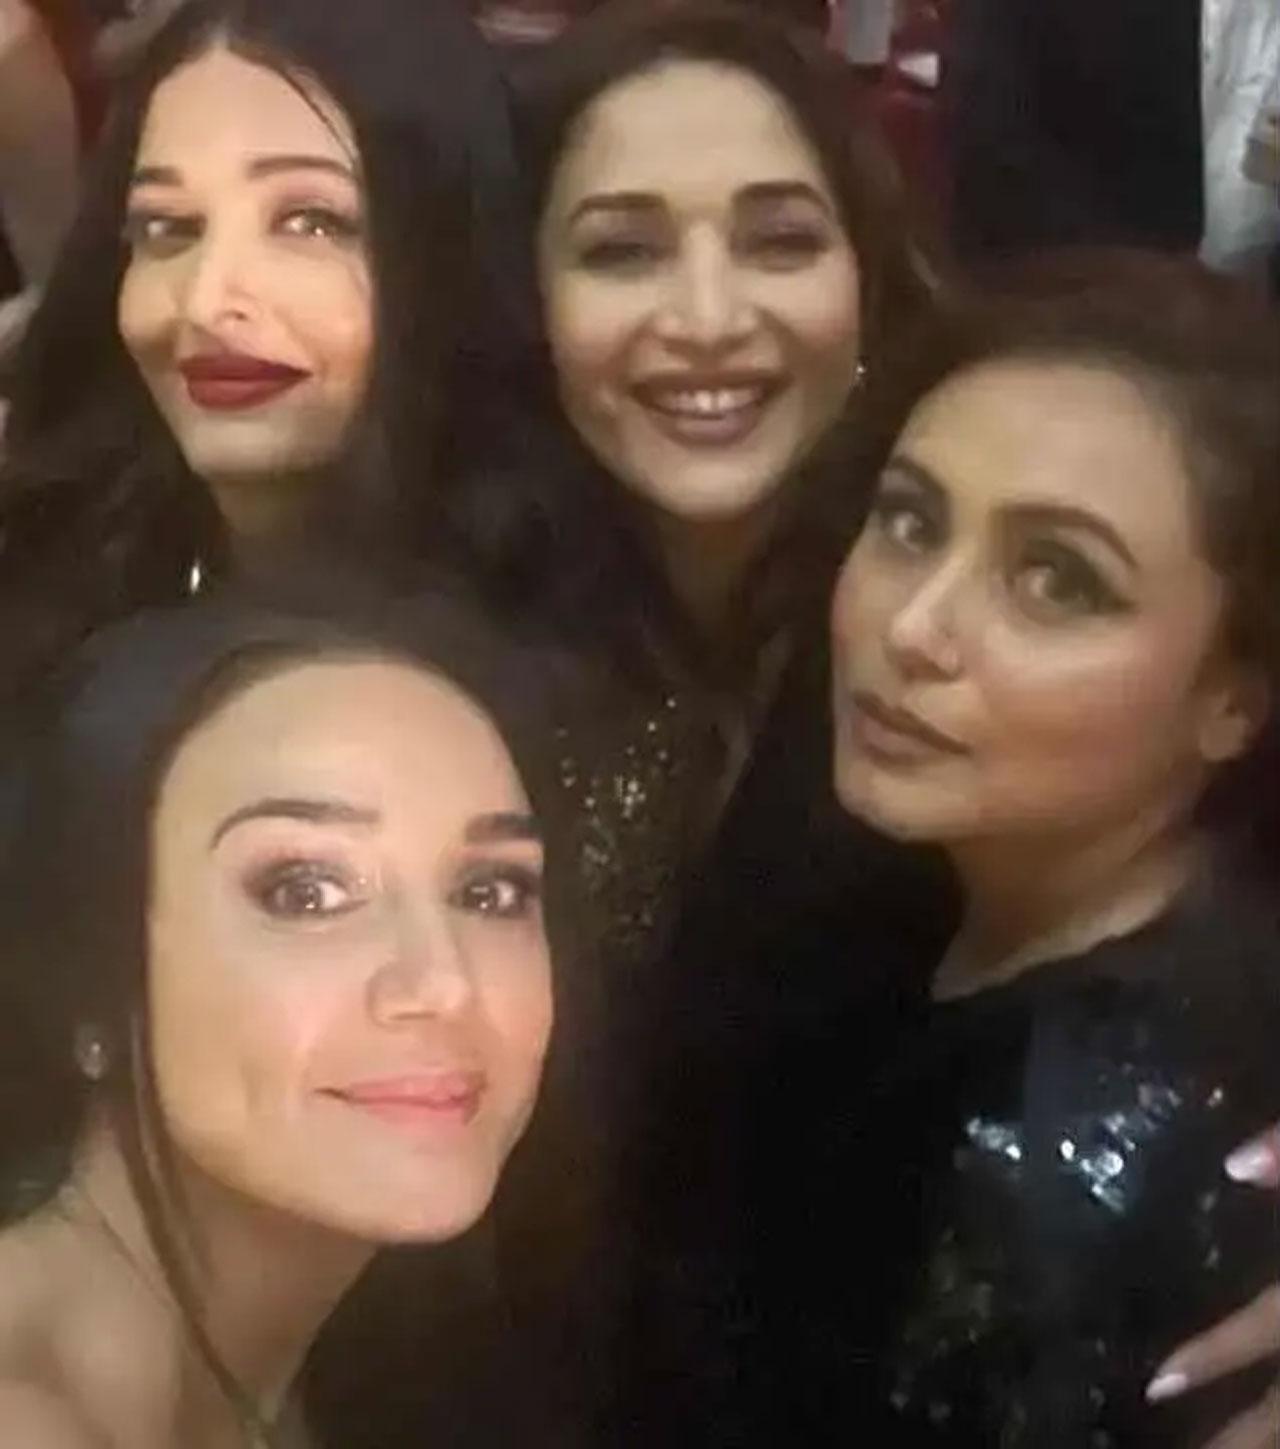 Apart from Shah Rukh Khan surreptitiously attending Karan Johar's party, the one moment that stood out was a selfie that comprises of names that made our childhoods memorable and mesmerising. Preity Zinta shared a selfie with Aishwarya Rai Bachchan, Rani Mukerji, Madhuri Dixit, and Kareena Kapoor Khan. Read the full story here